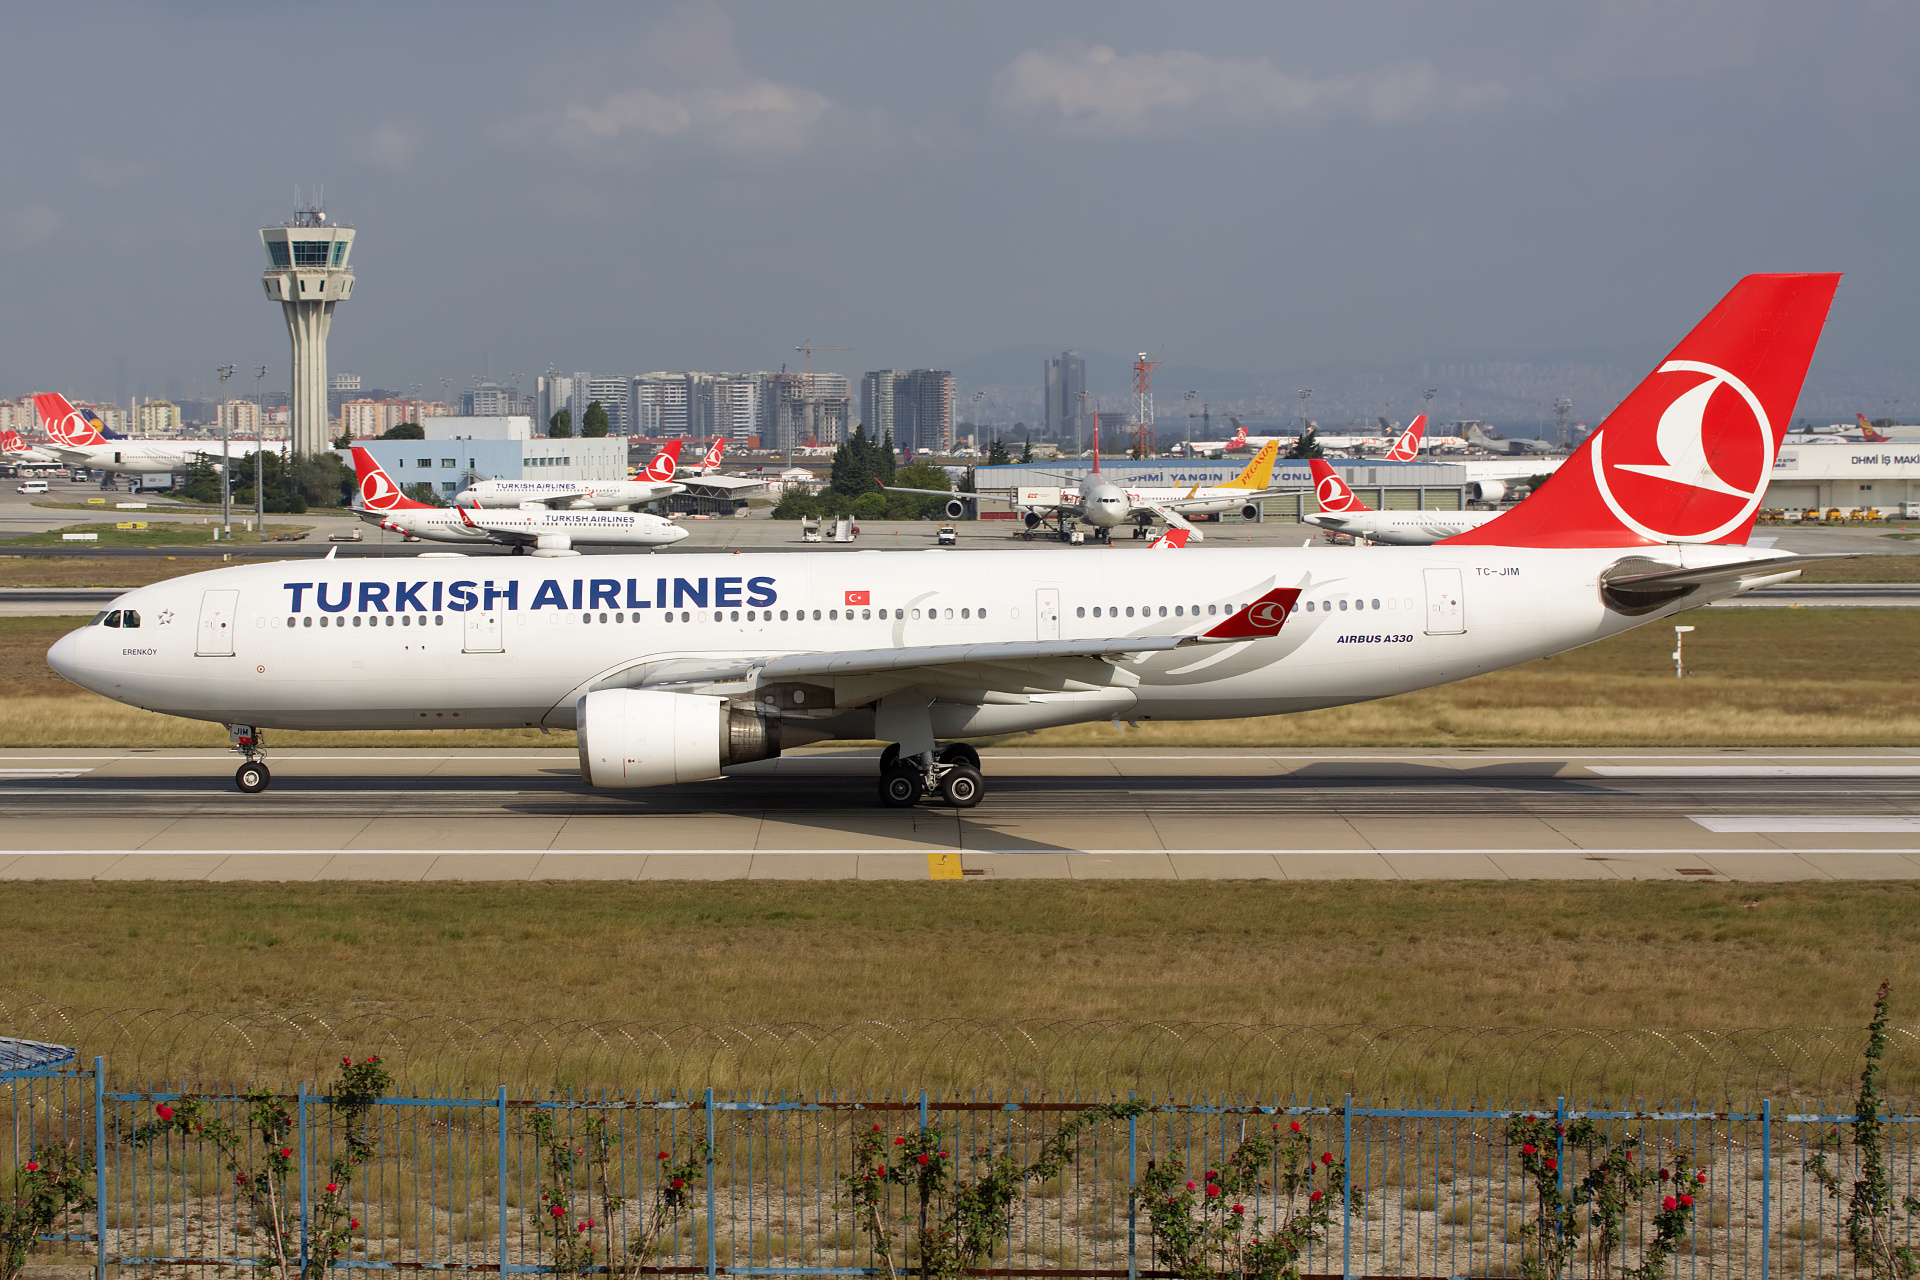 TC-JIM (Aircraft » Istanbul Atatürk Airport » Airbus A330-200 » THY Turkish Airlines)